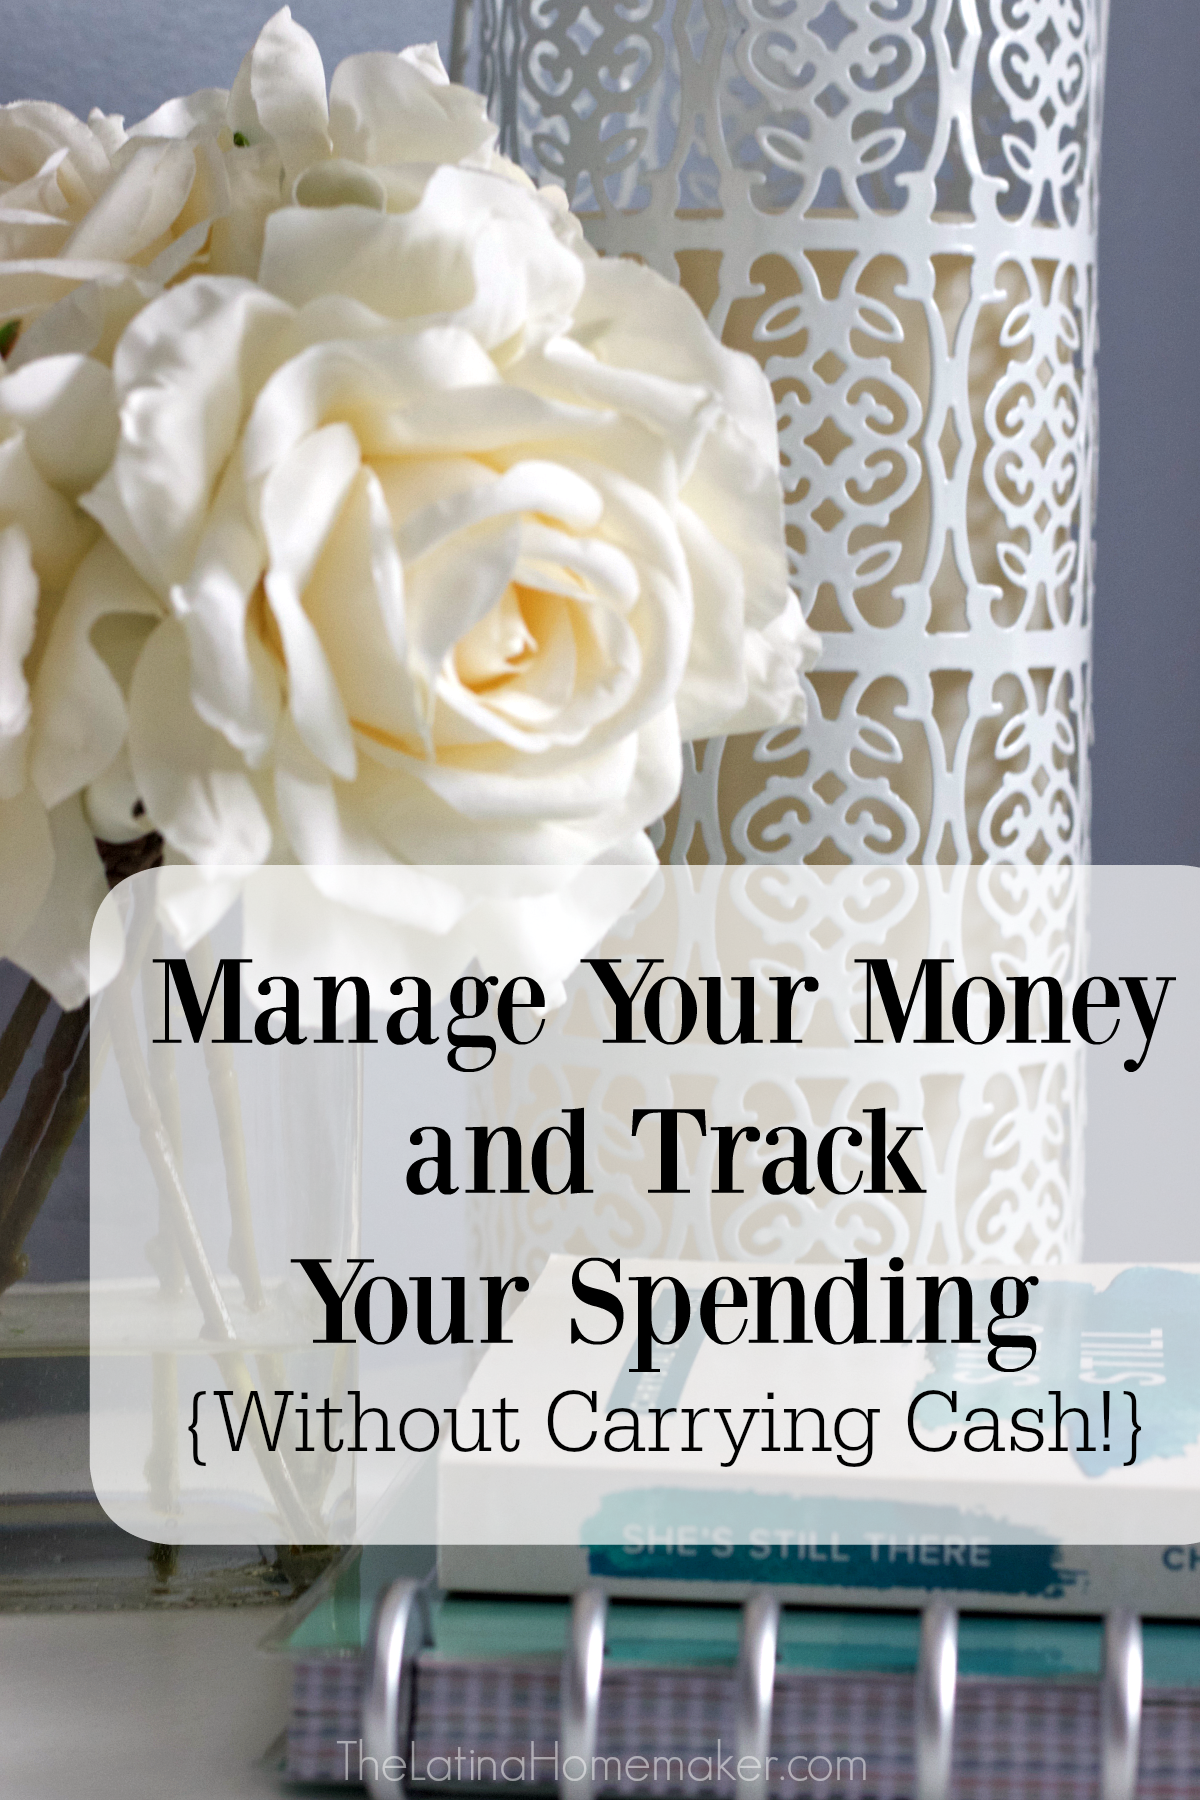 Manage Your Money and Track Your Spending {Without Carrying Cash!}